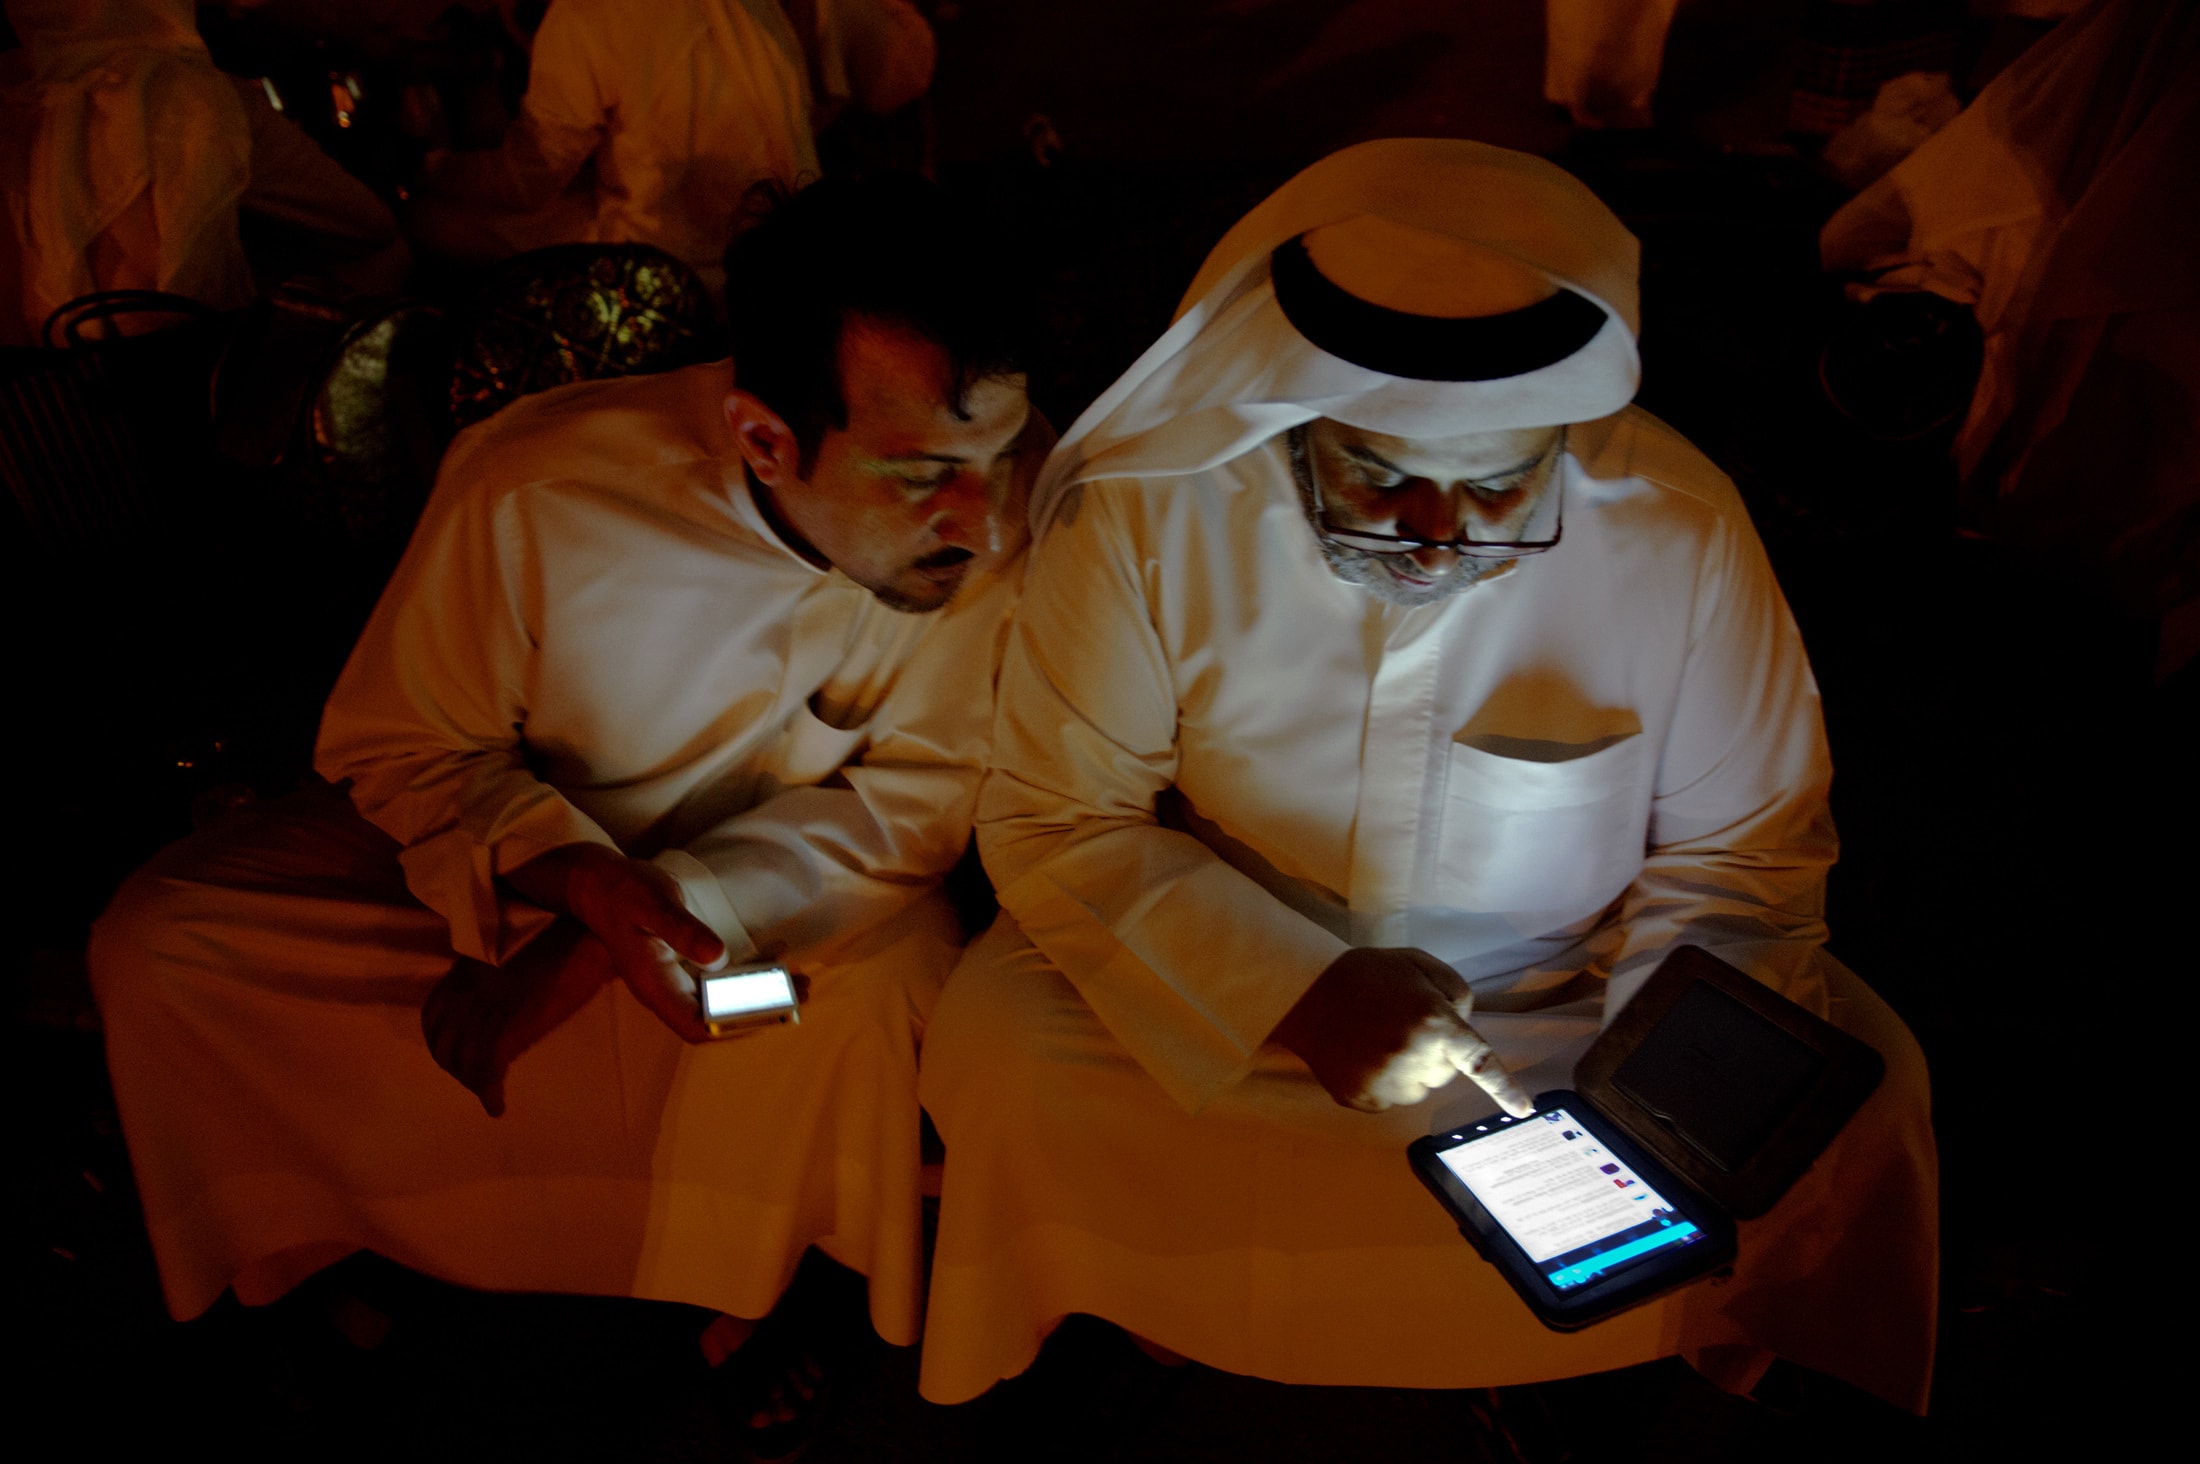 Kuwaiti citizen Raken Subaiya checks his Twitter feed on his phone as Yousef al Anazi looks on during a sit-in protest in front of the Justice Palace in Kuwait City October 19, 2012, REUTERS/Stephanie Mcgehee